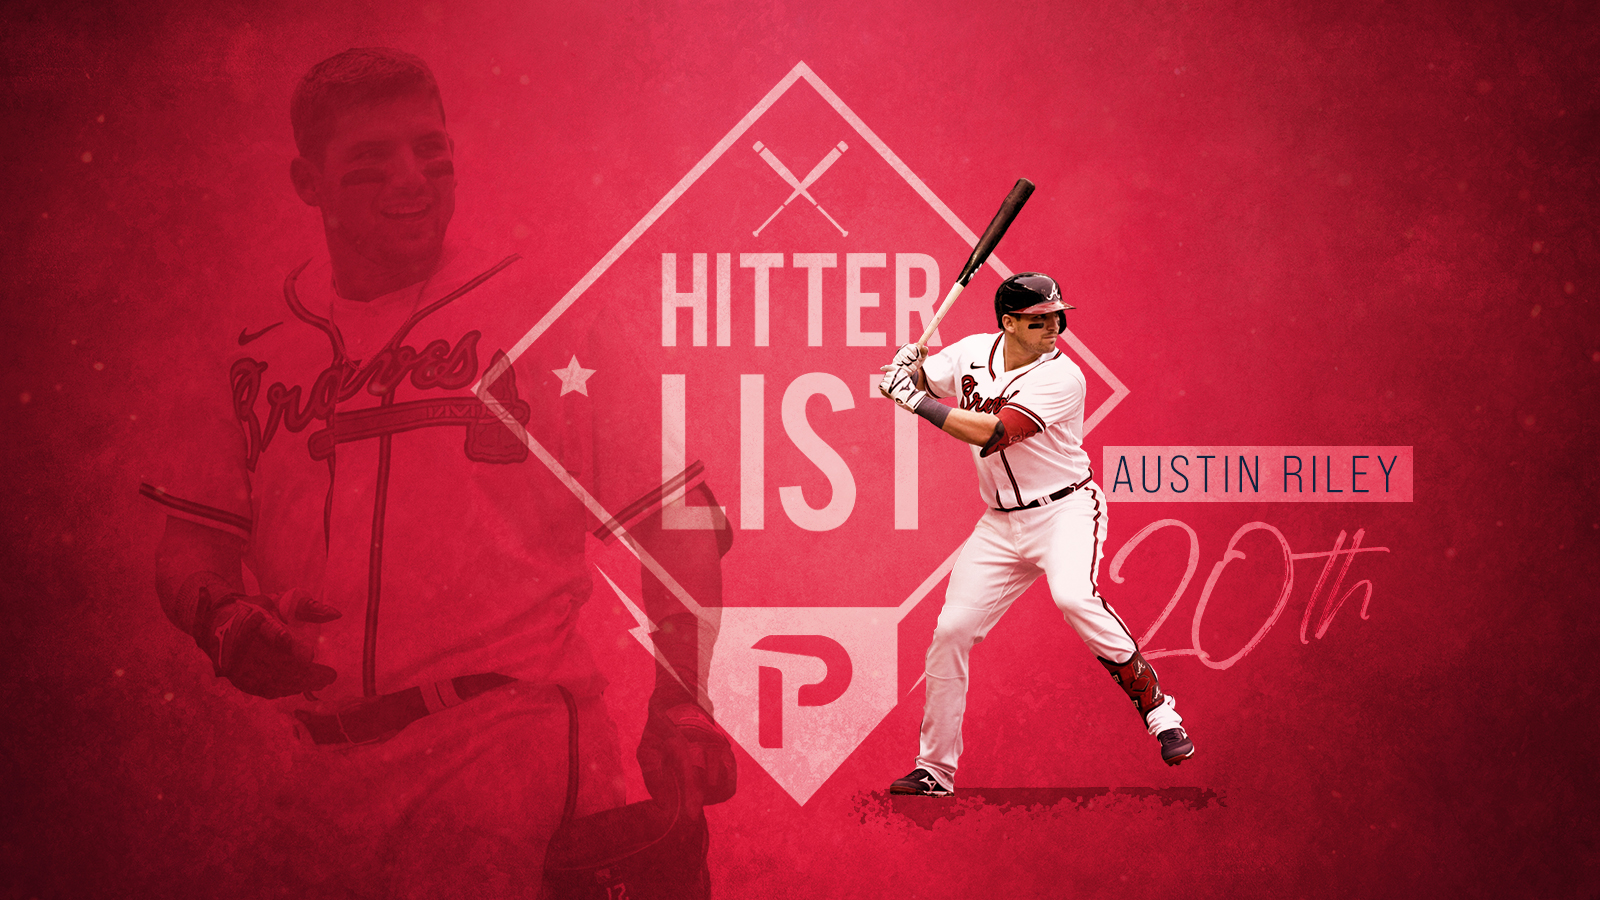 Hitter List 4/13: Top 150 Hitters For 2022 – Week 1